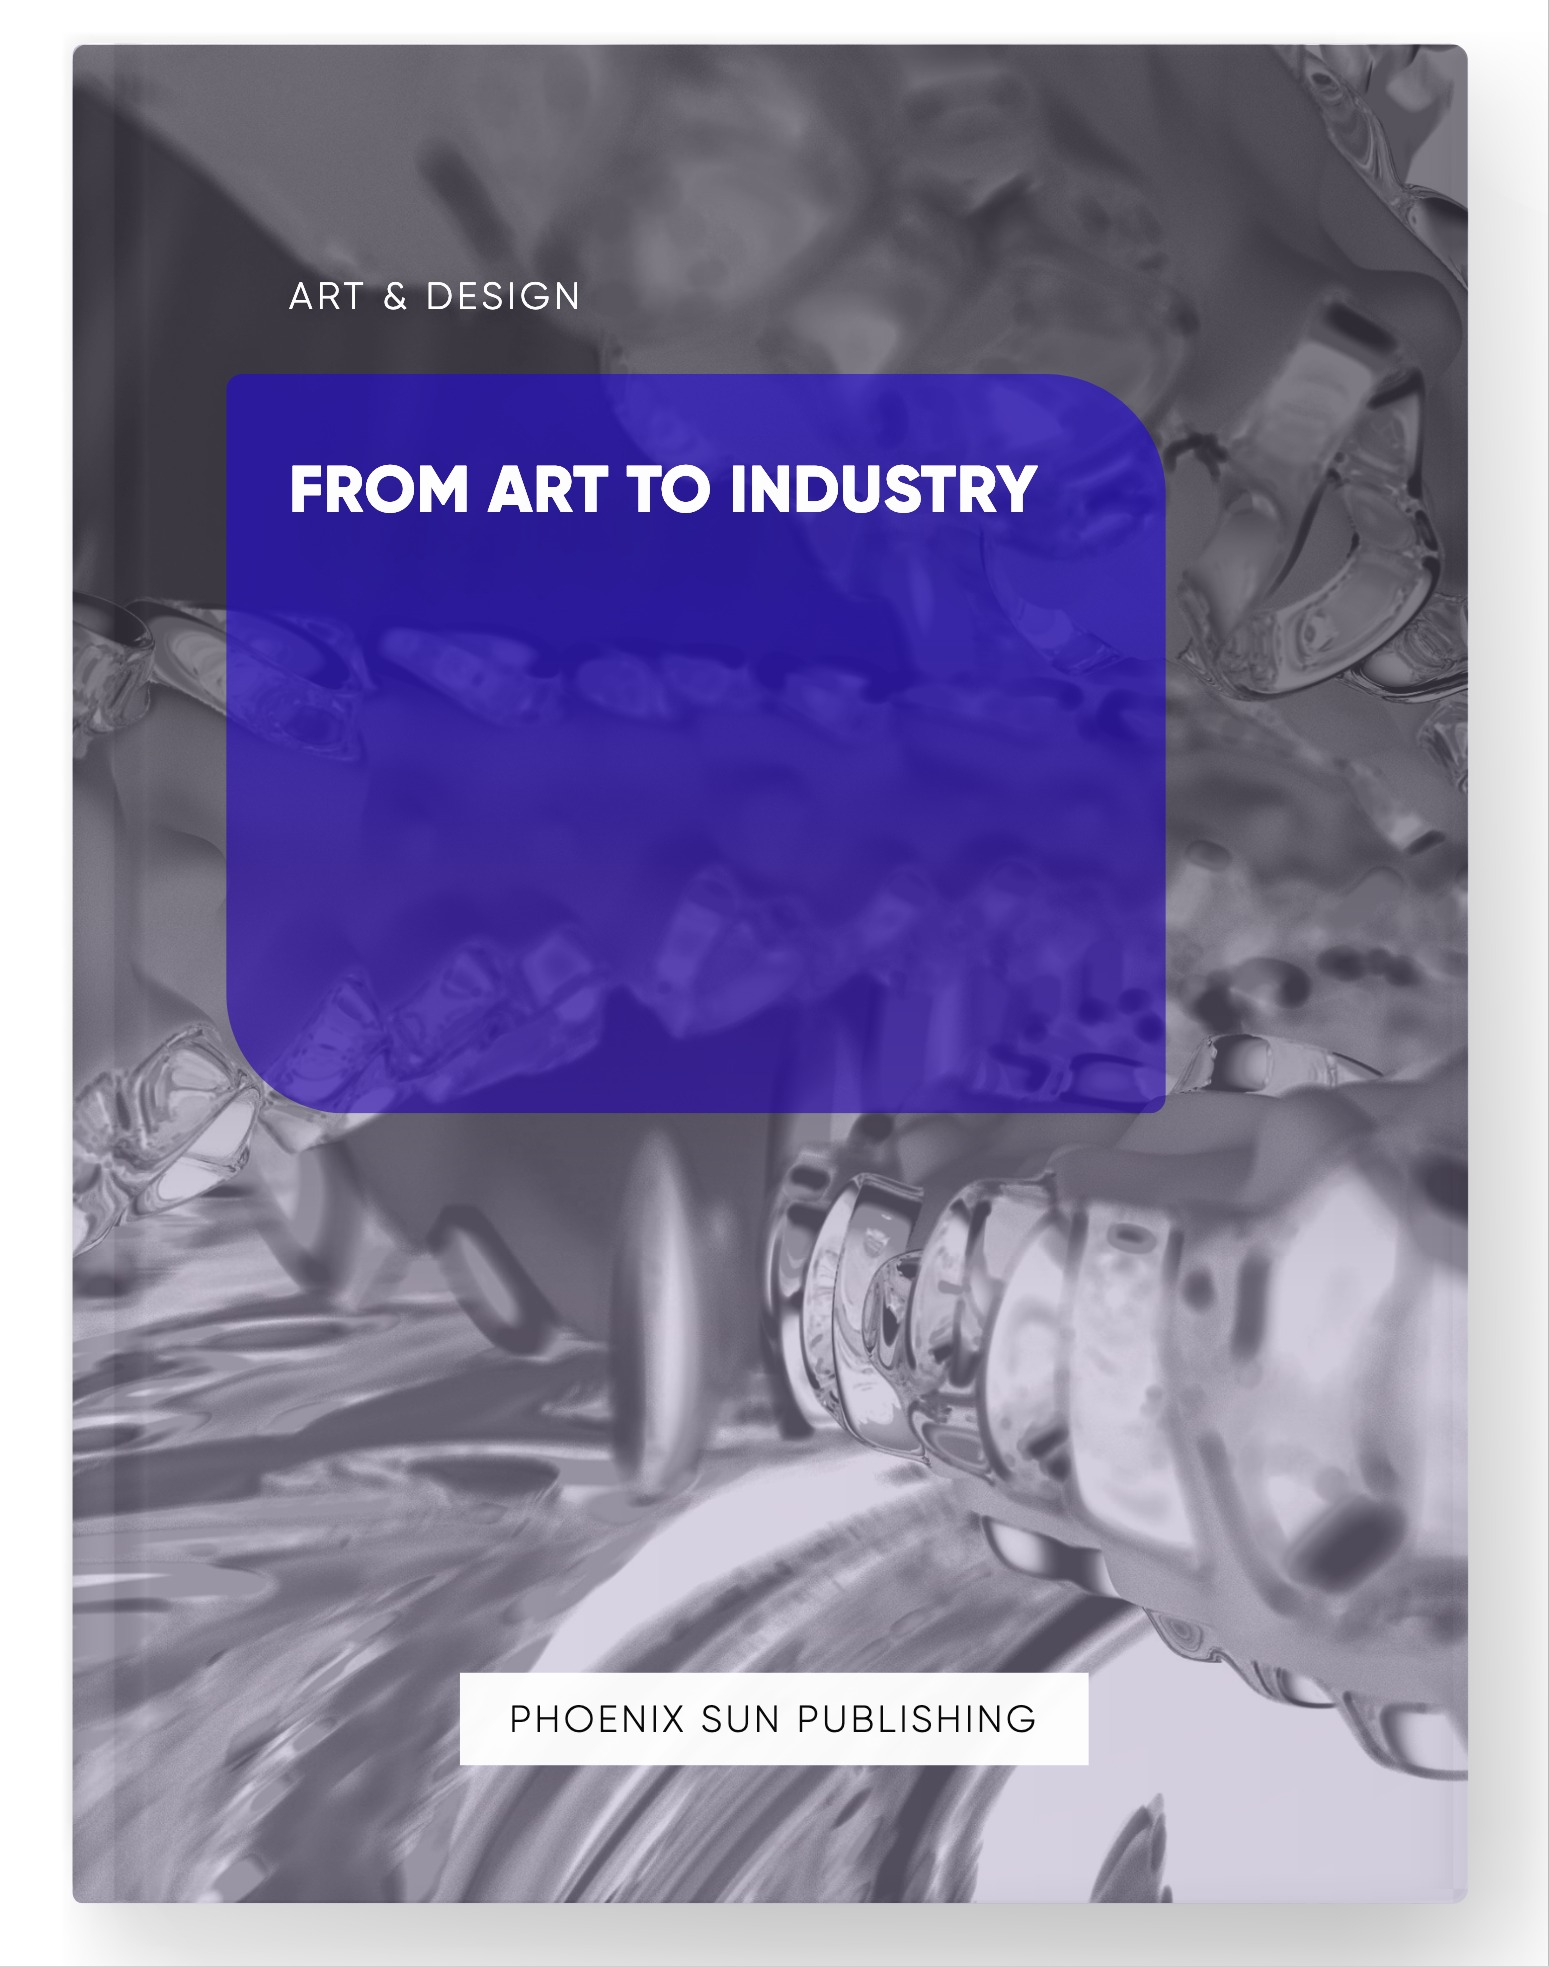 From Art to Industry